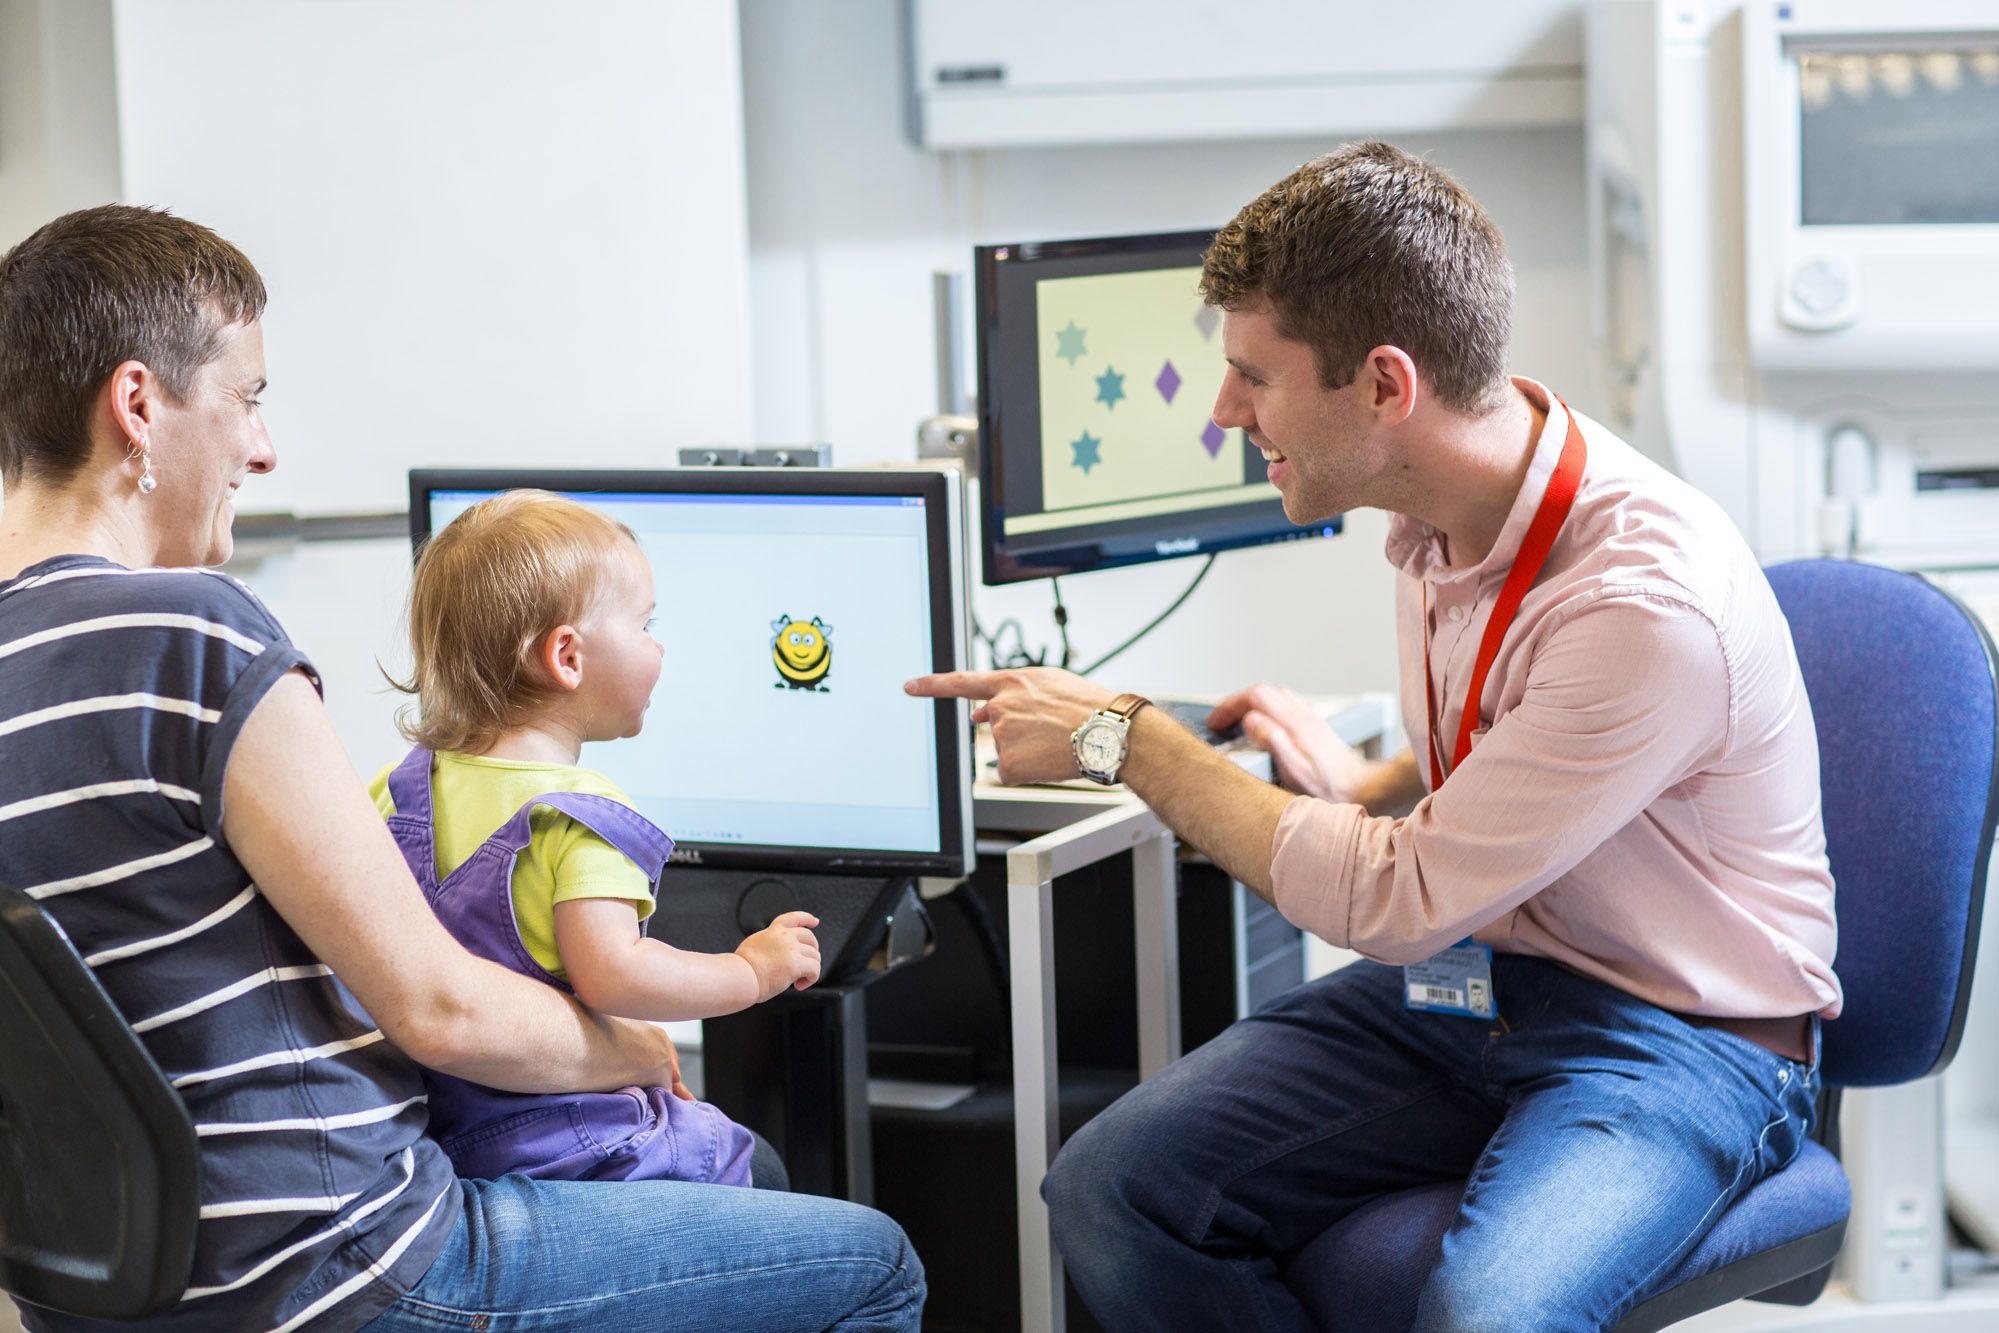 A happy mother, child and doctor sat at a computer. The doctor is pointing at an drawing of a bumble bee on the screen.